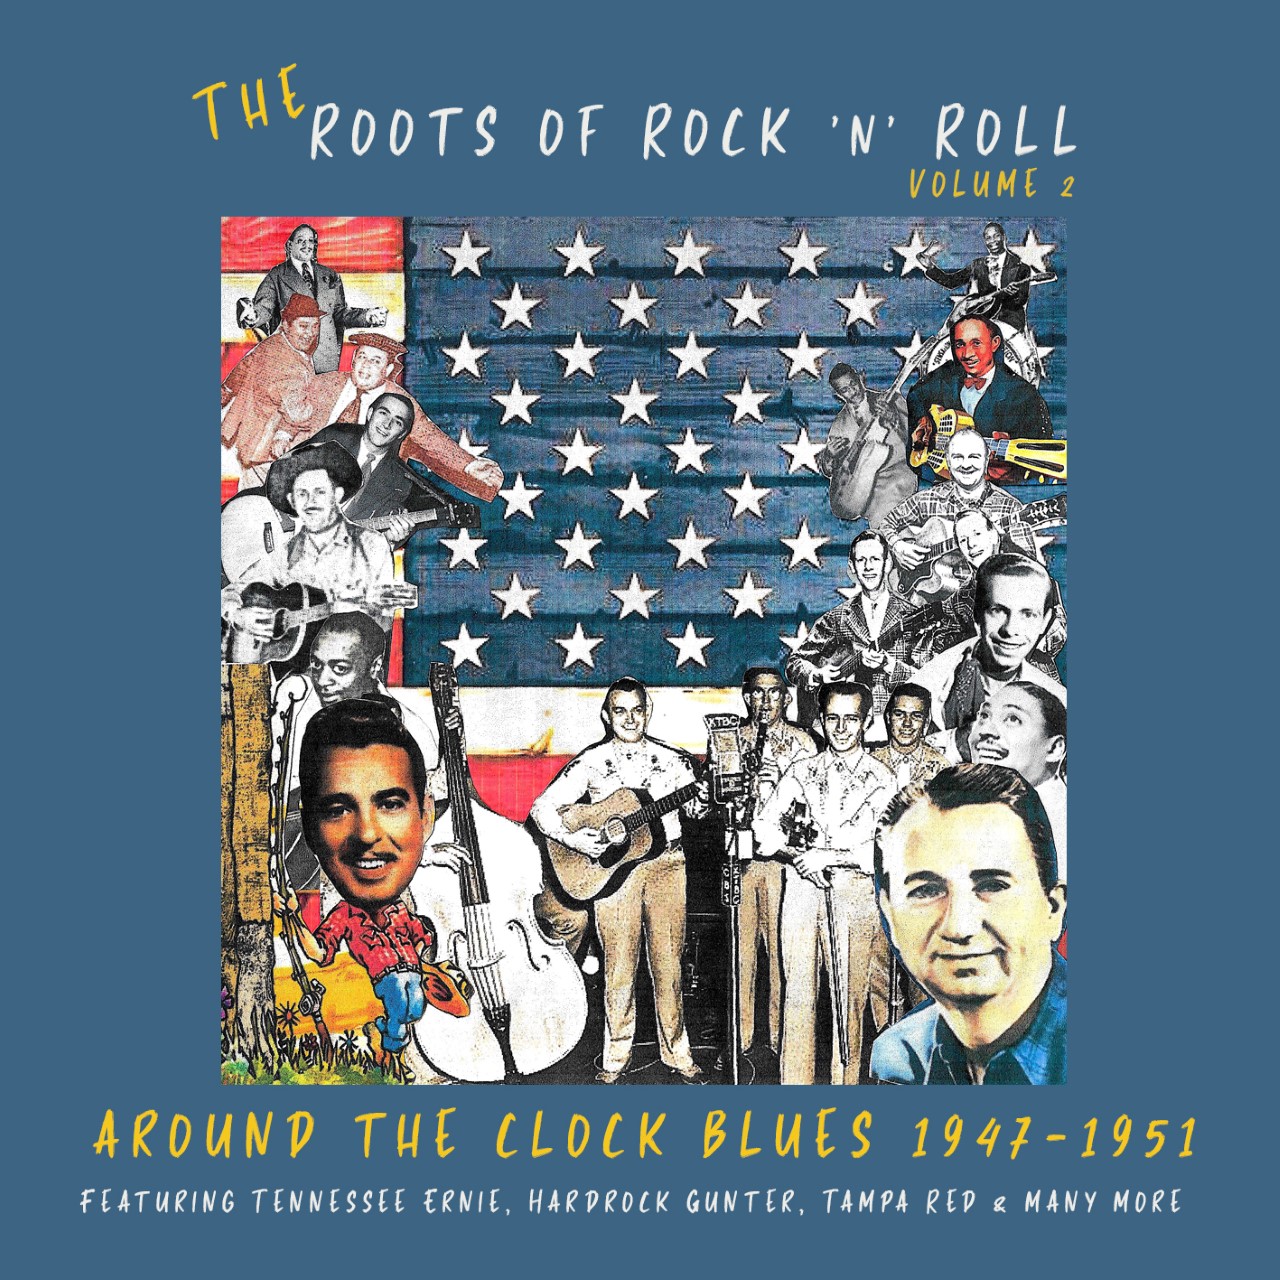 THE ROOTS OF ROCK ’N’ ROLL VOL 2 ‘Around the Clock Blues’ 1947-1951